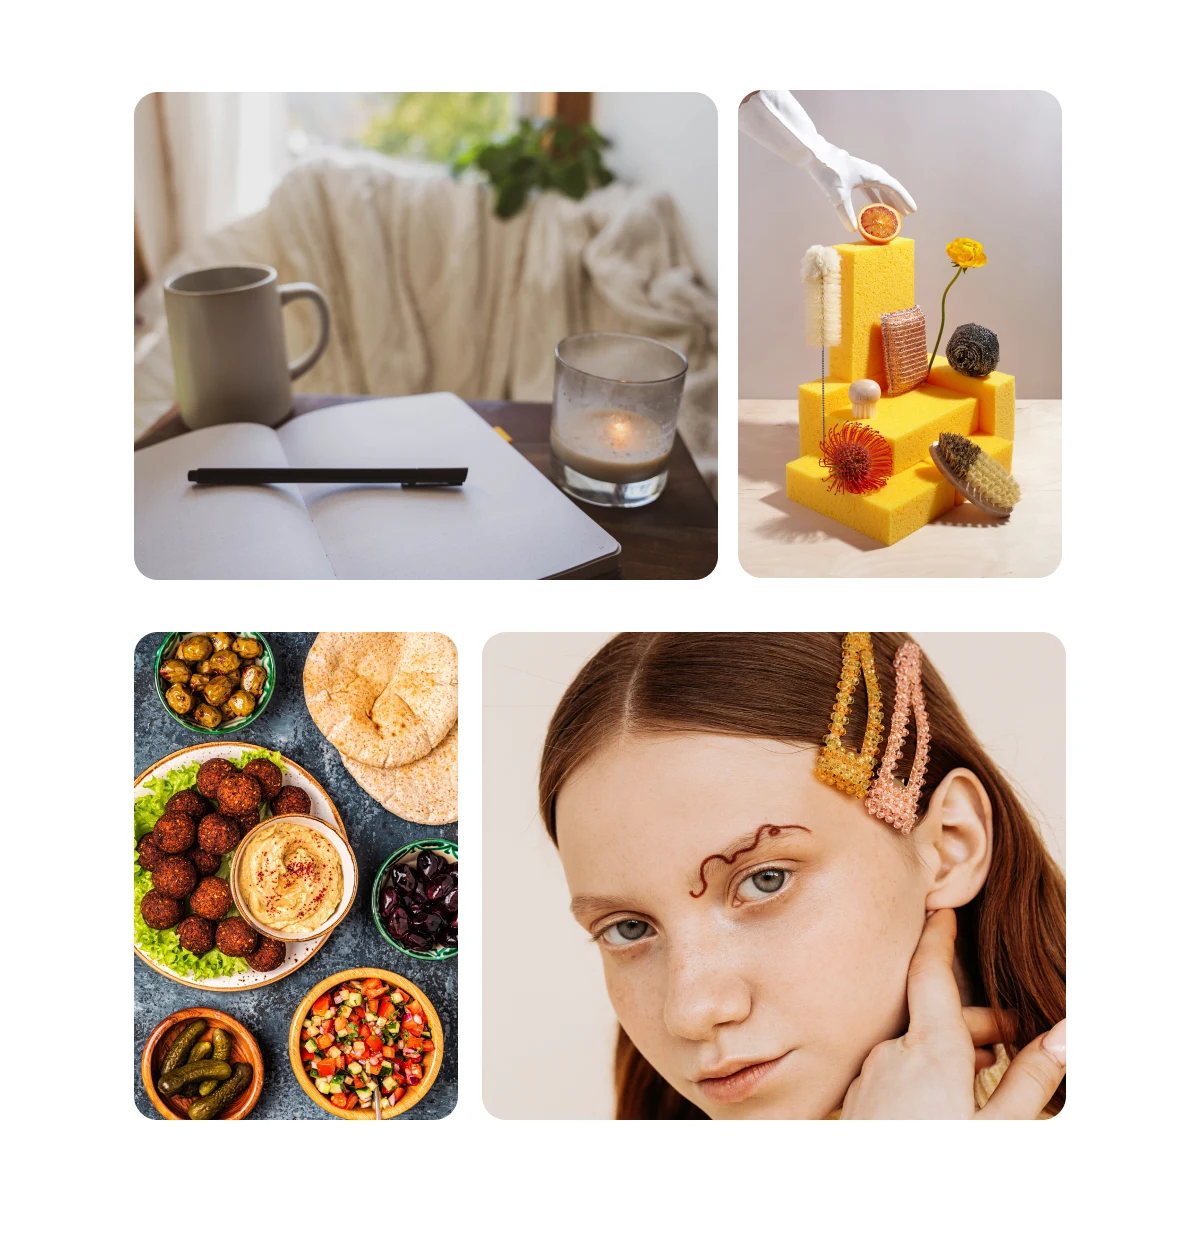 Pin grid of four images including healthy morning routine, spring bedroom inspiration, mindful arts and crafts, soft girl aesthetic.